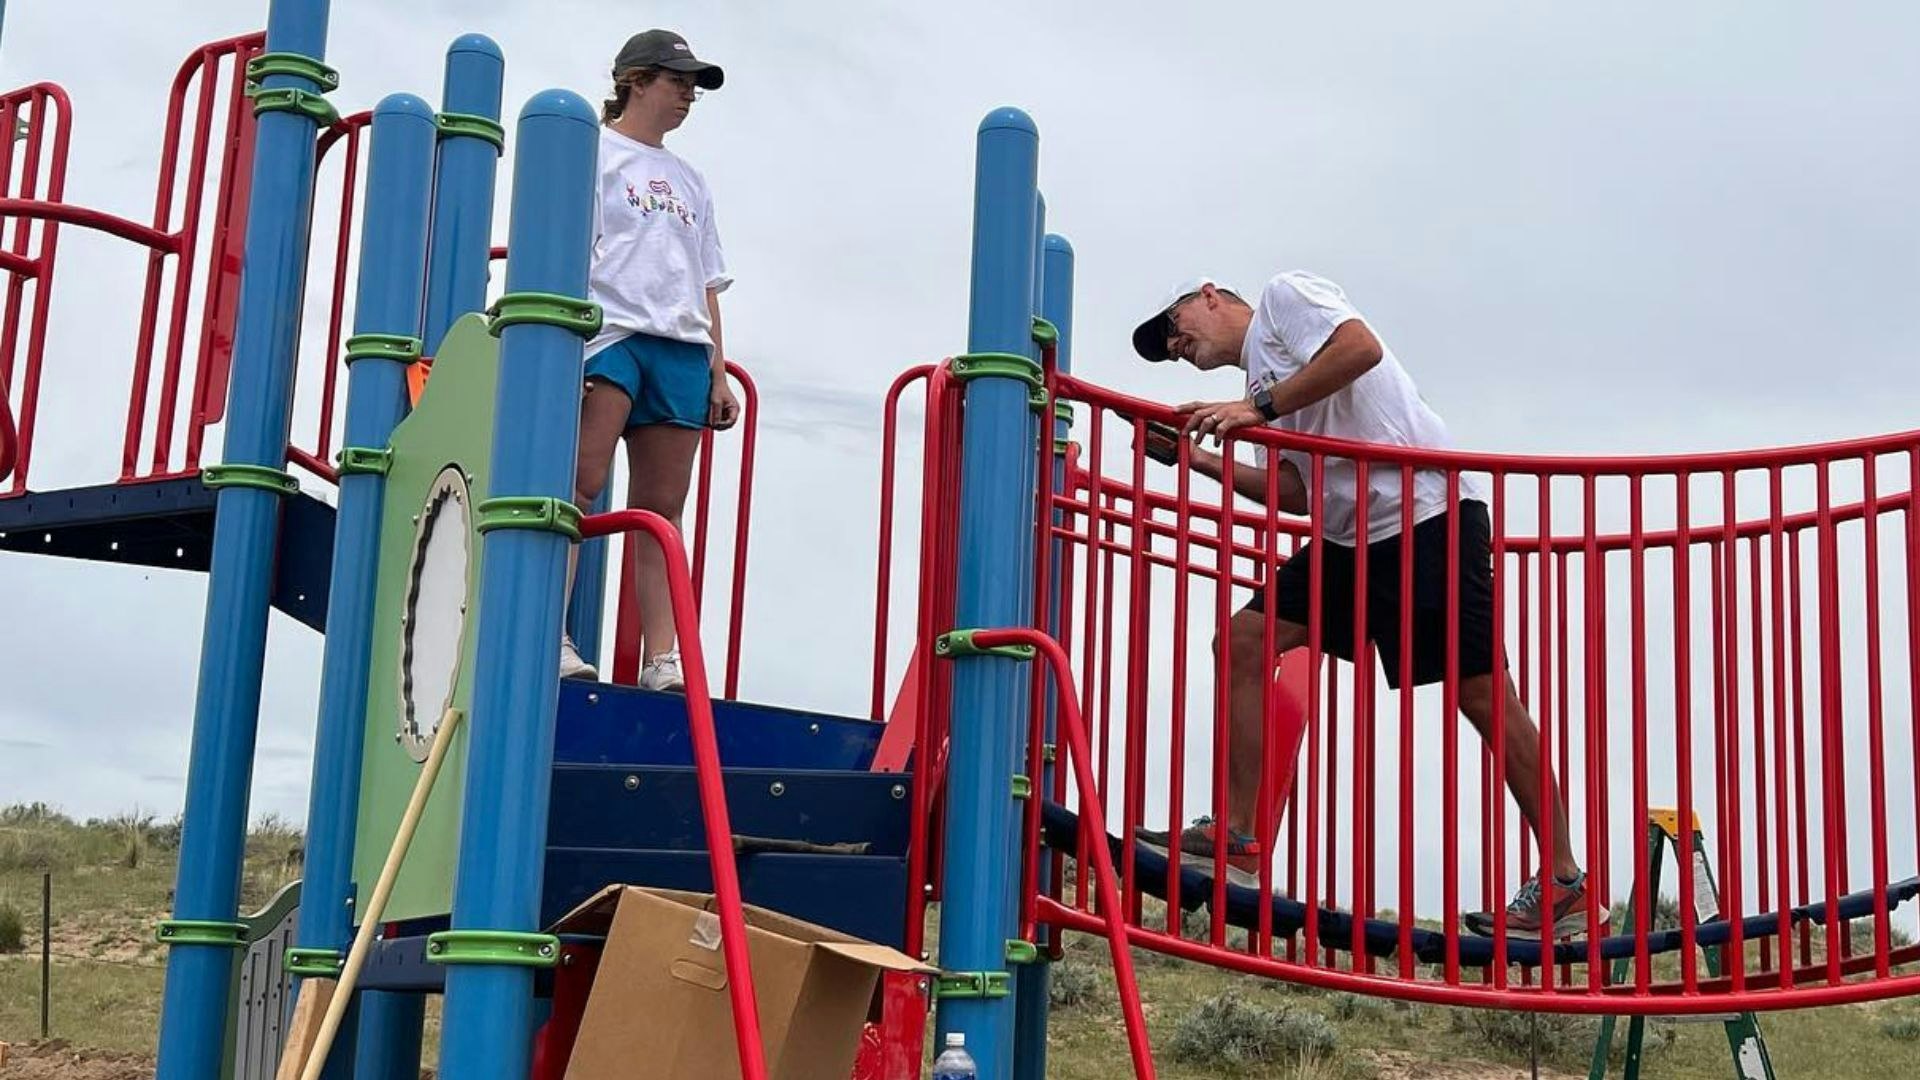 A fully accessible playground from Unlimited Play is built in the Wyoming backyard of the Pinkerton family.